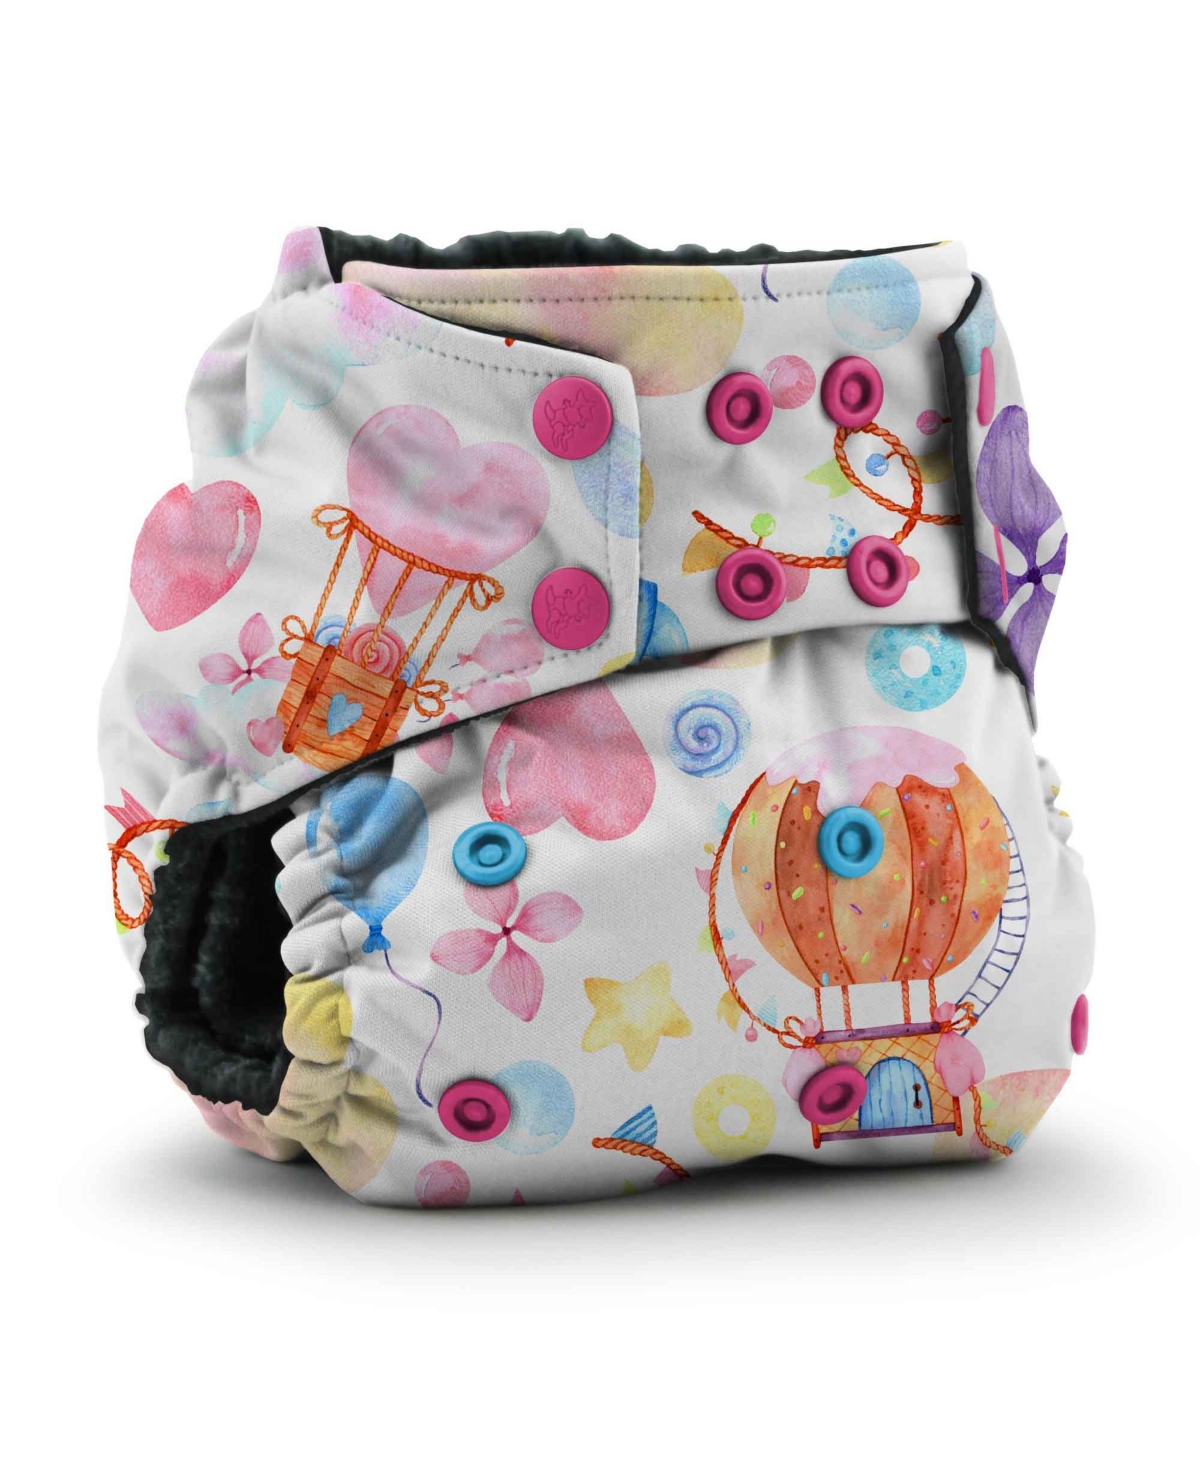 Kanga Care Kids' Rumparooz Obv (organic Rayon From Bamboo Velour) One Size Pocket Cloth Diaper In Candylicious